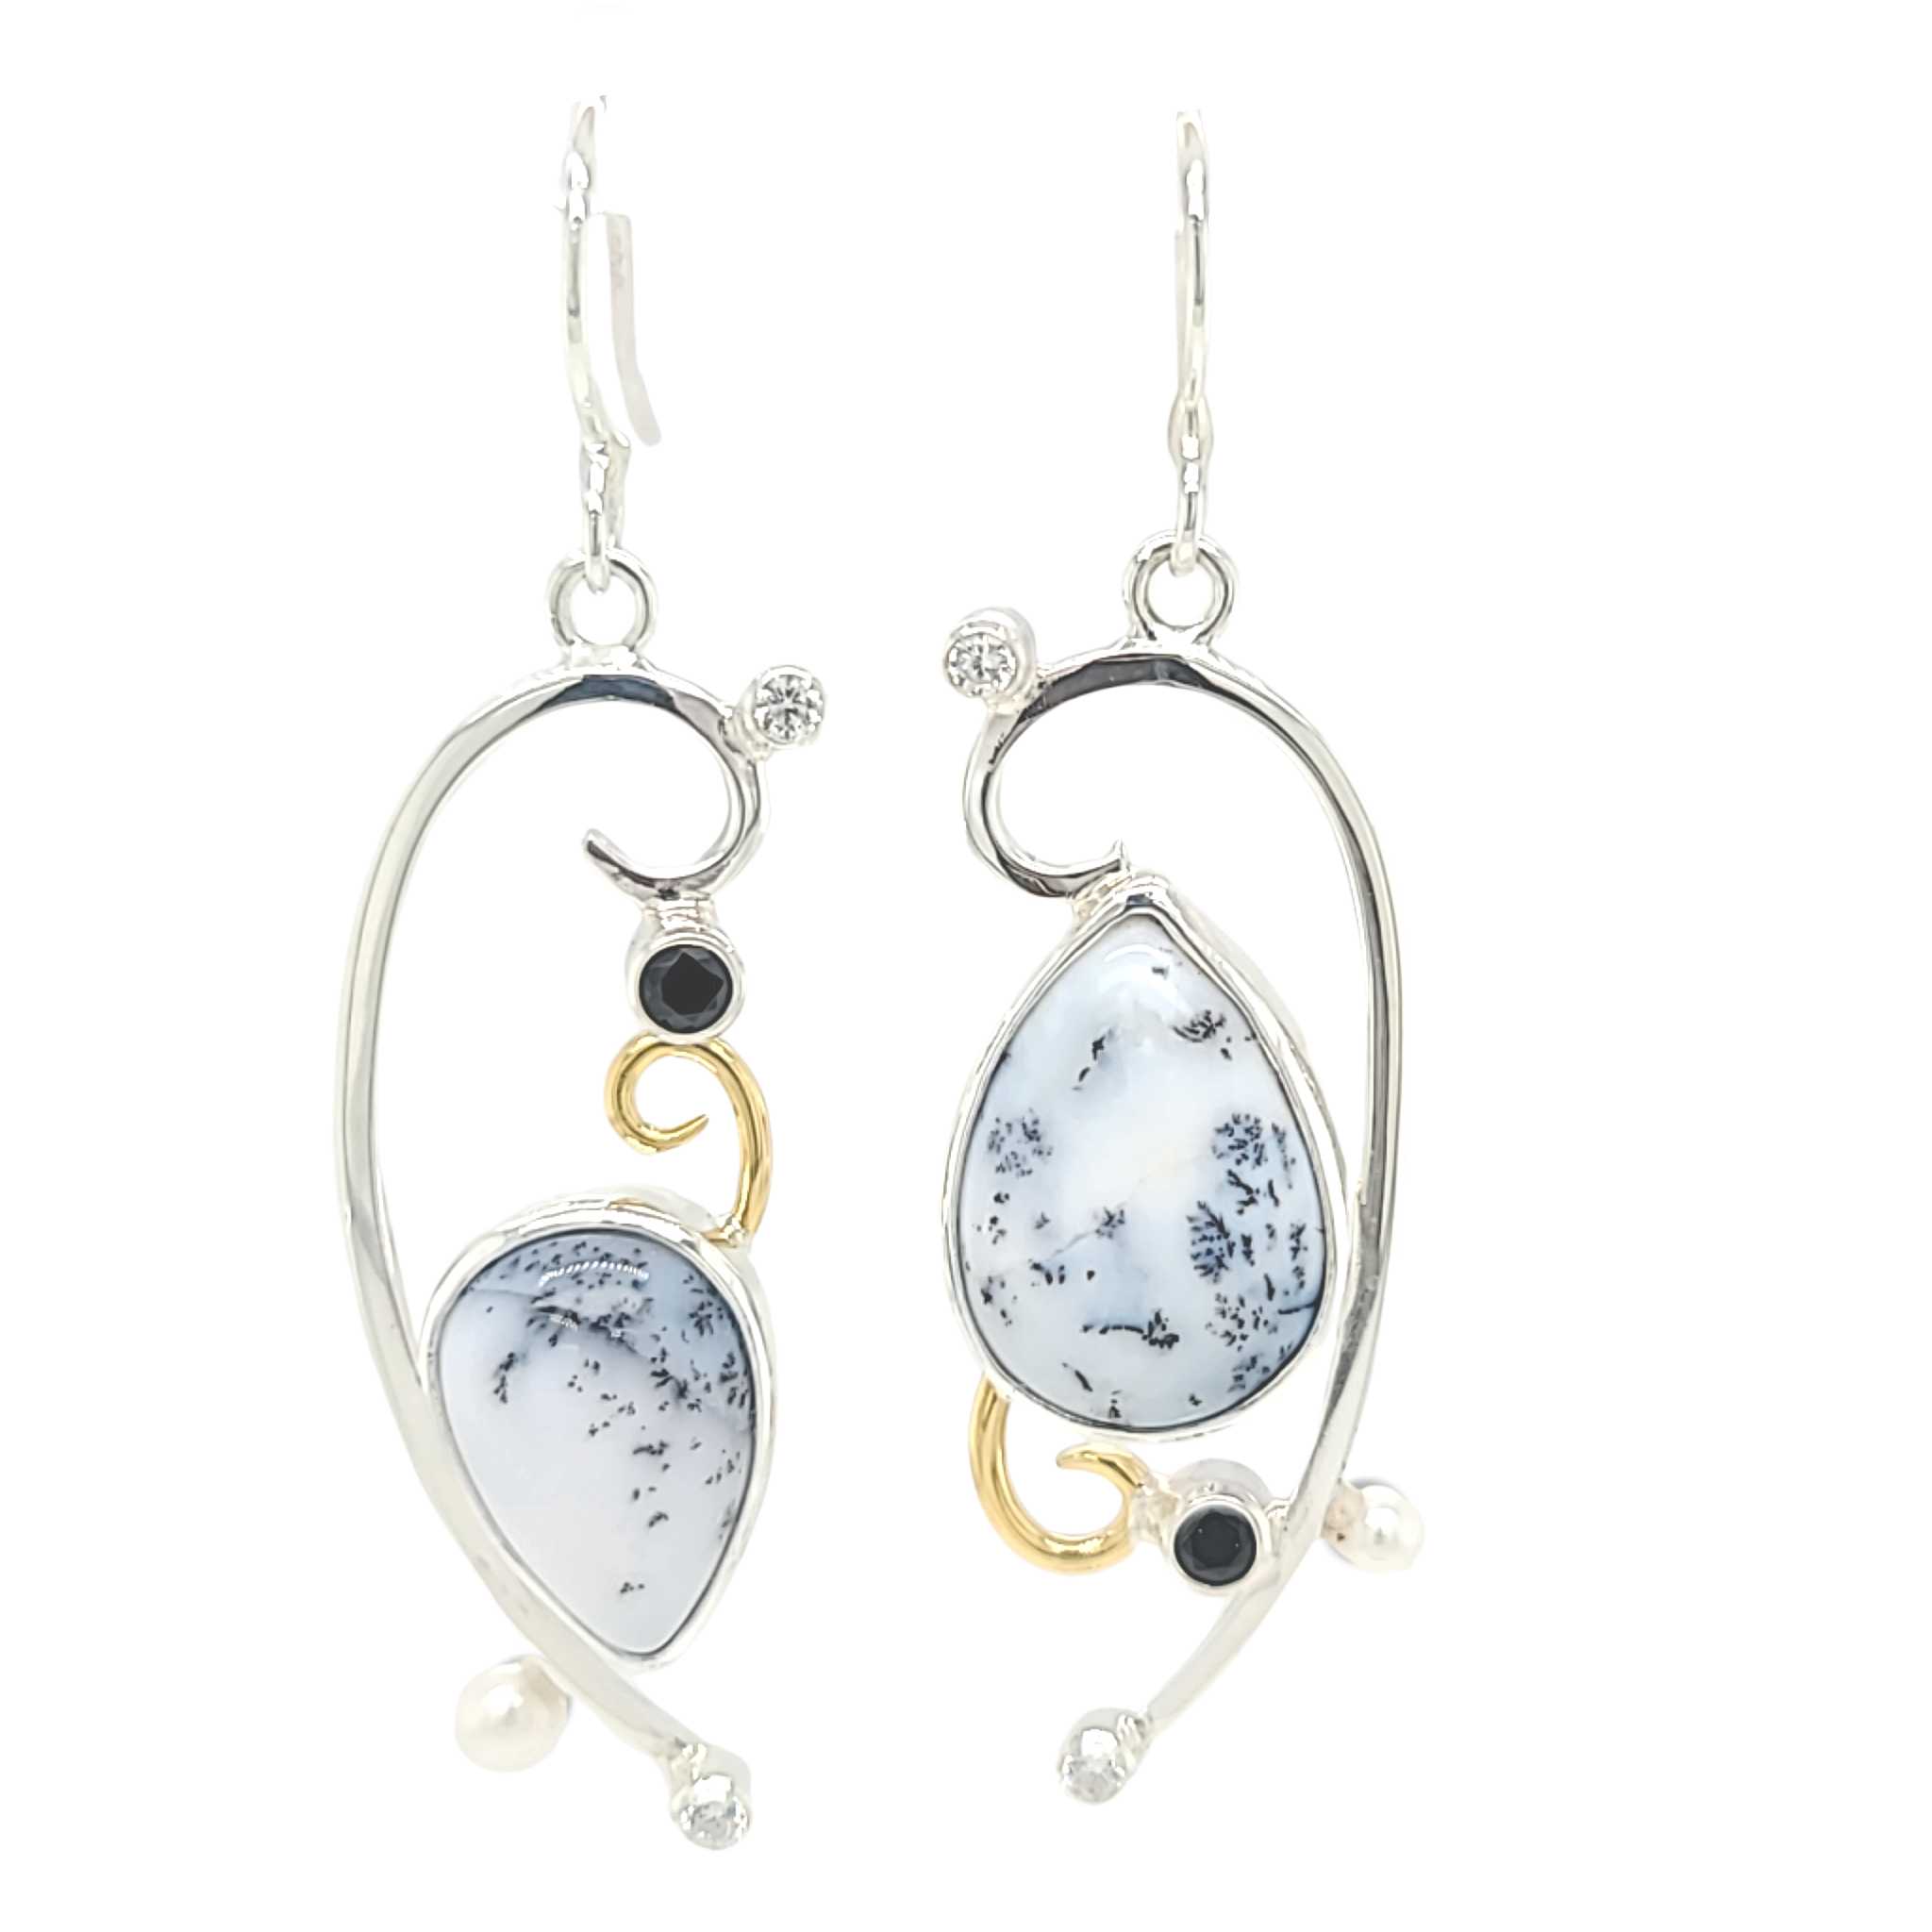 Dendritic Opal Earrings with 22k accents